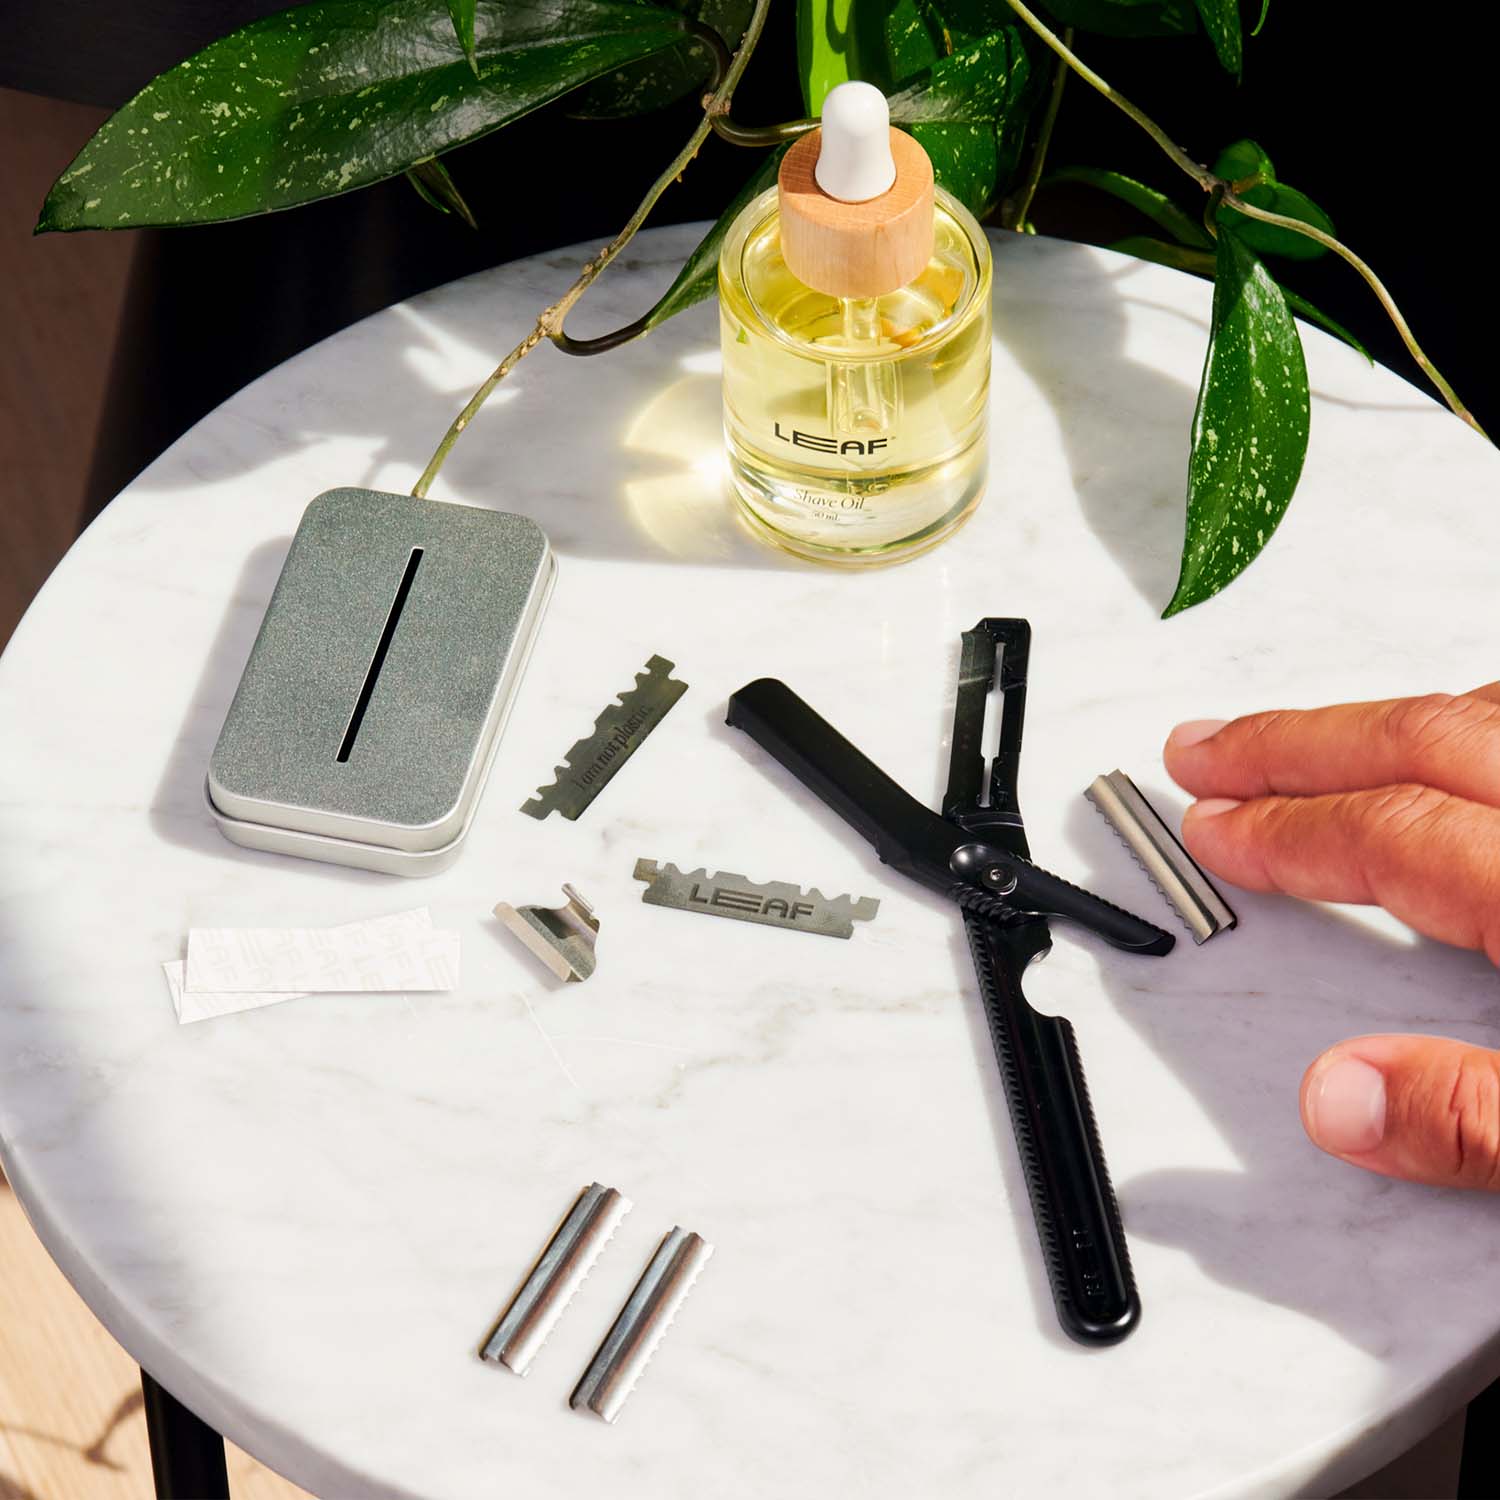 Dermaplaner tool with it's refillable components apart, on a marble table next to shave oil and fresh refillables.